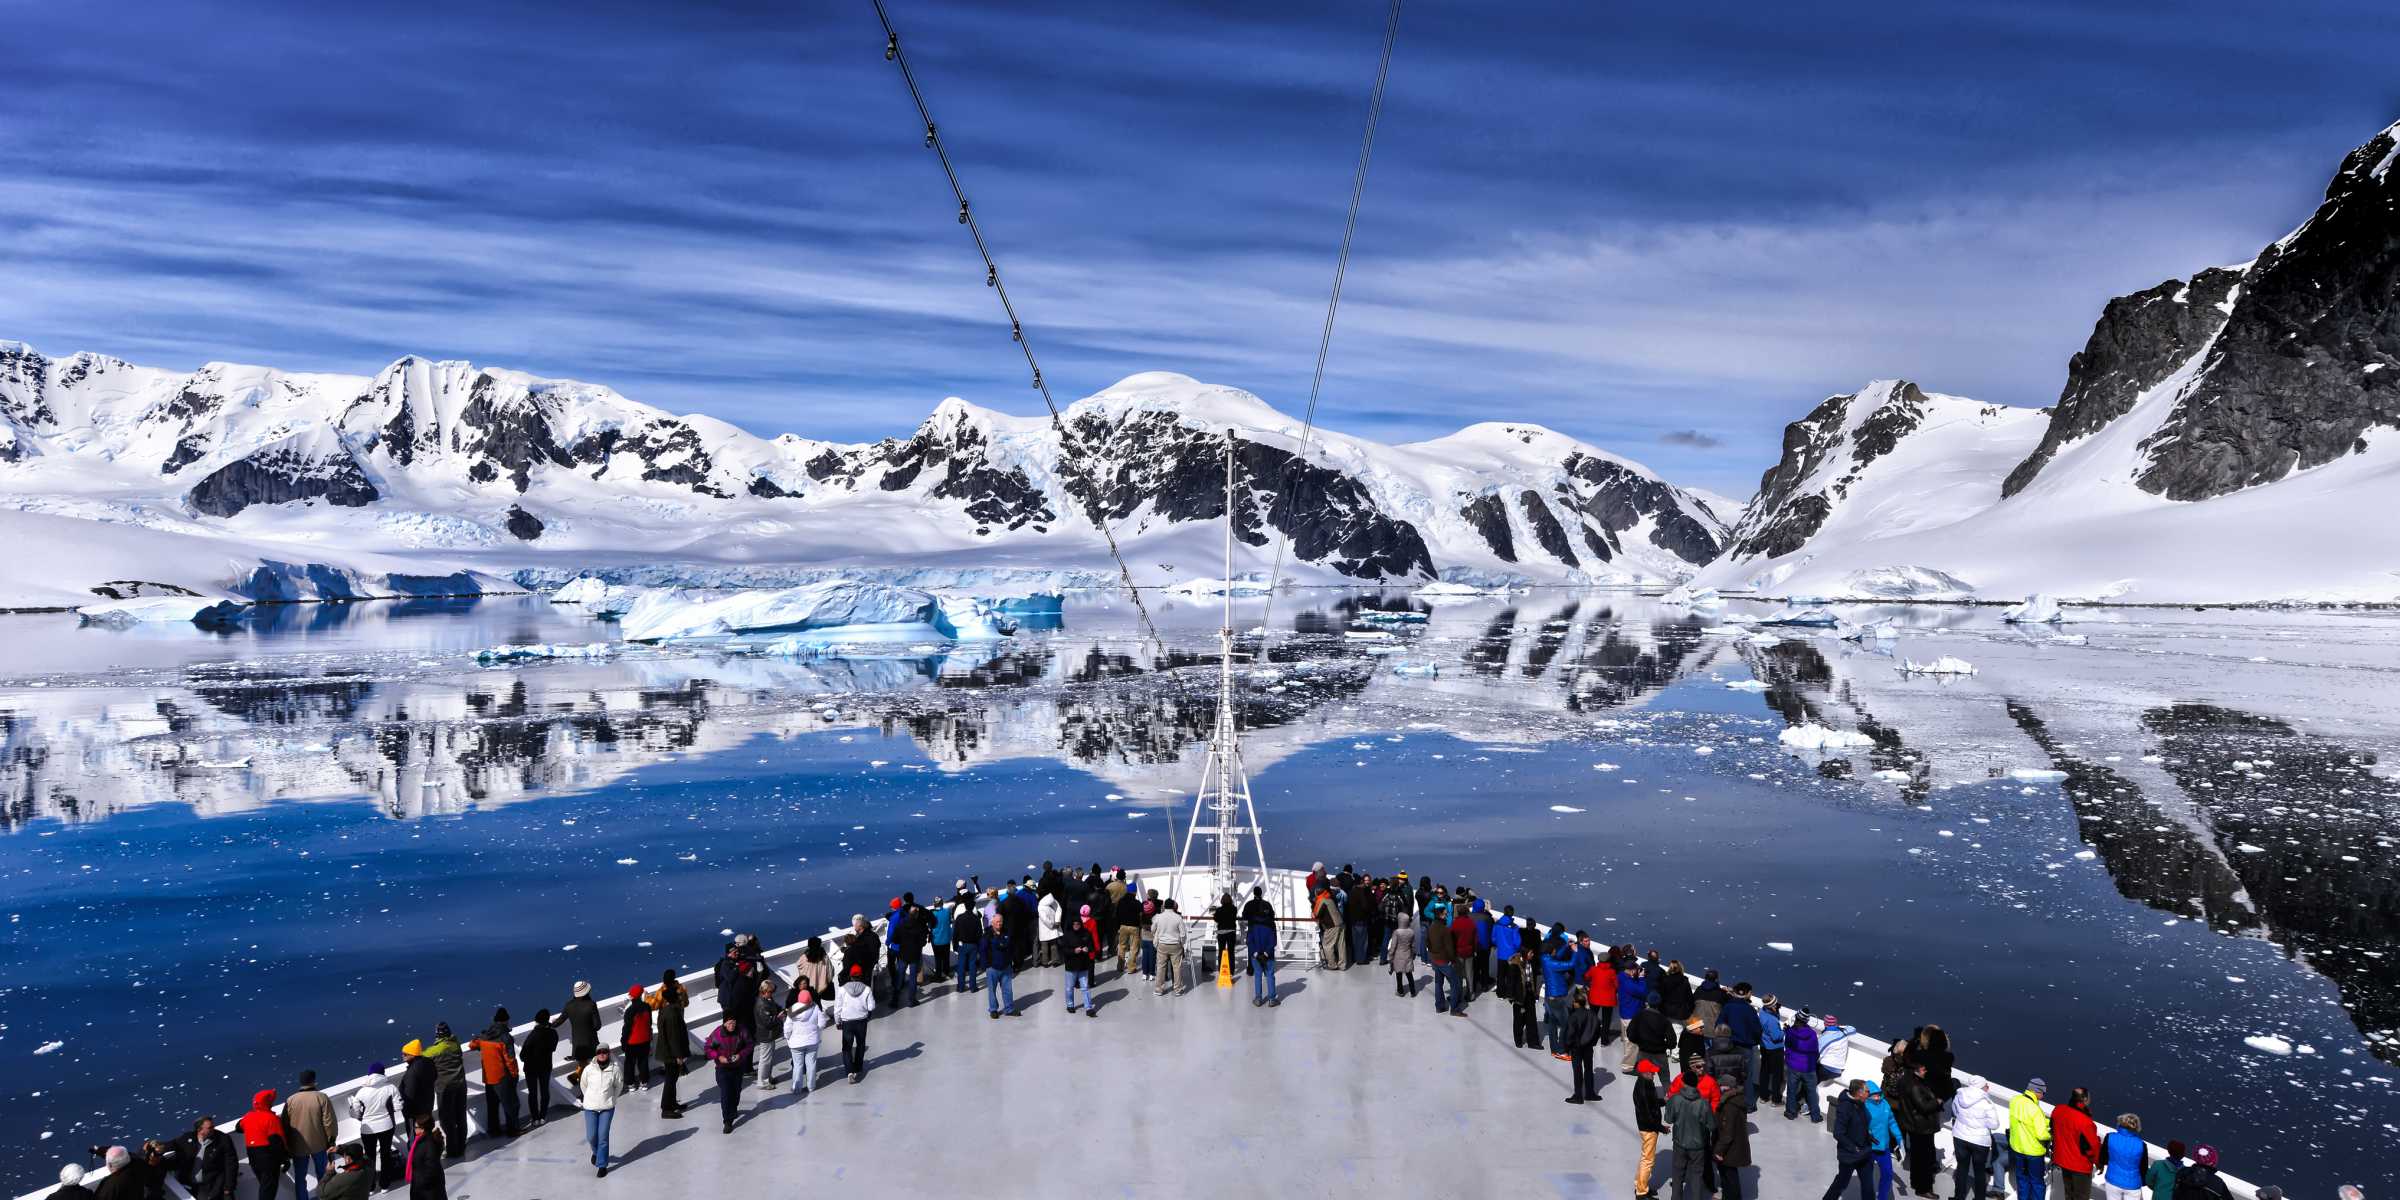 Find Luxury and Adventure On a Cruise to Antarctica